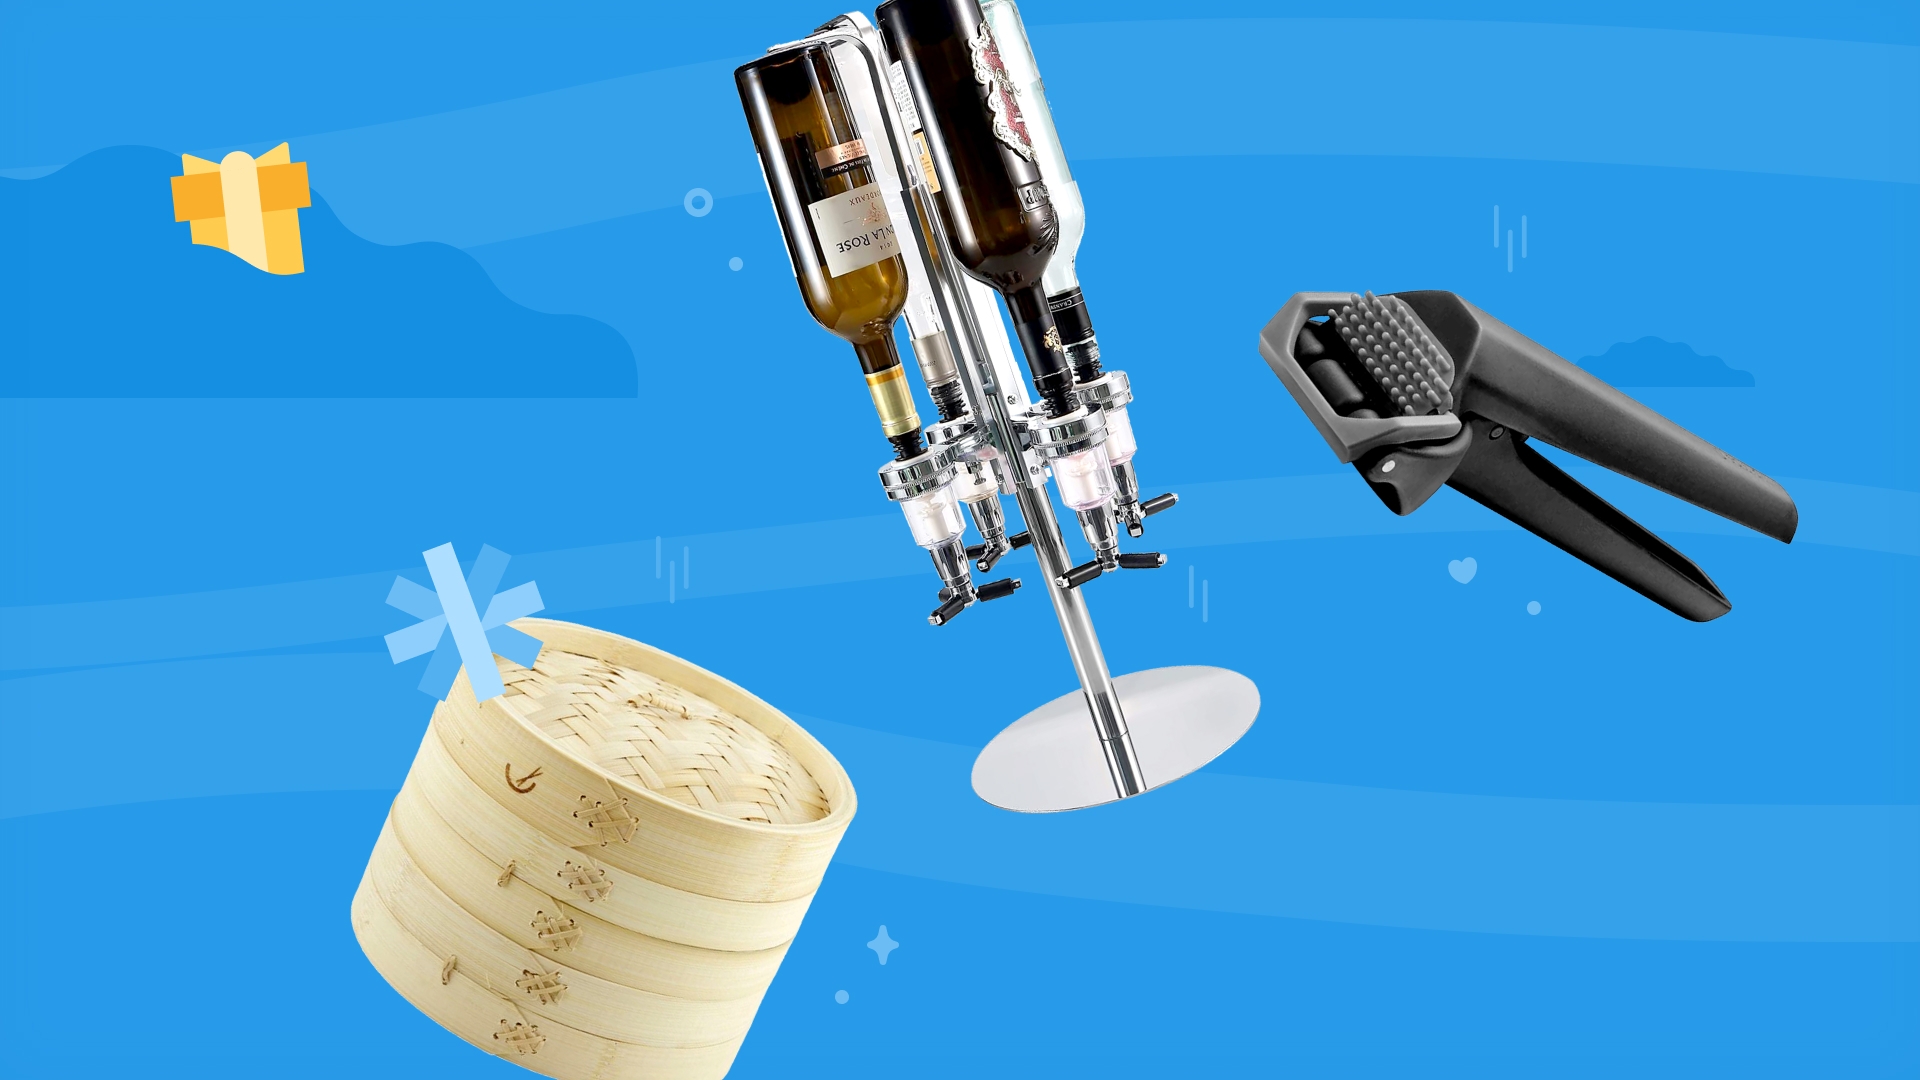 A selection of foodie gifts on a blue background including a revolving liquor dispenser, a garlic press and a steamer.